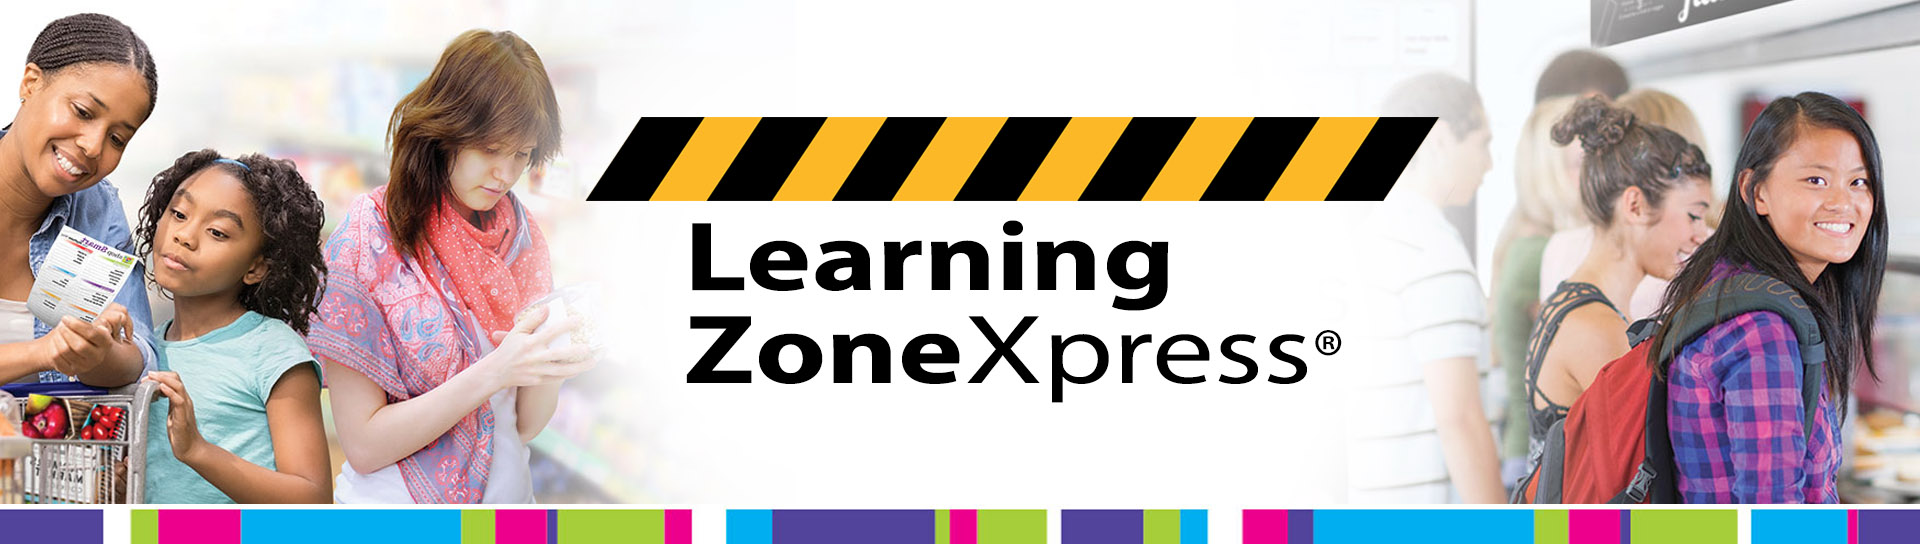 Image for Learning ZoneXpress